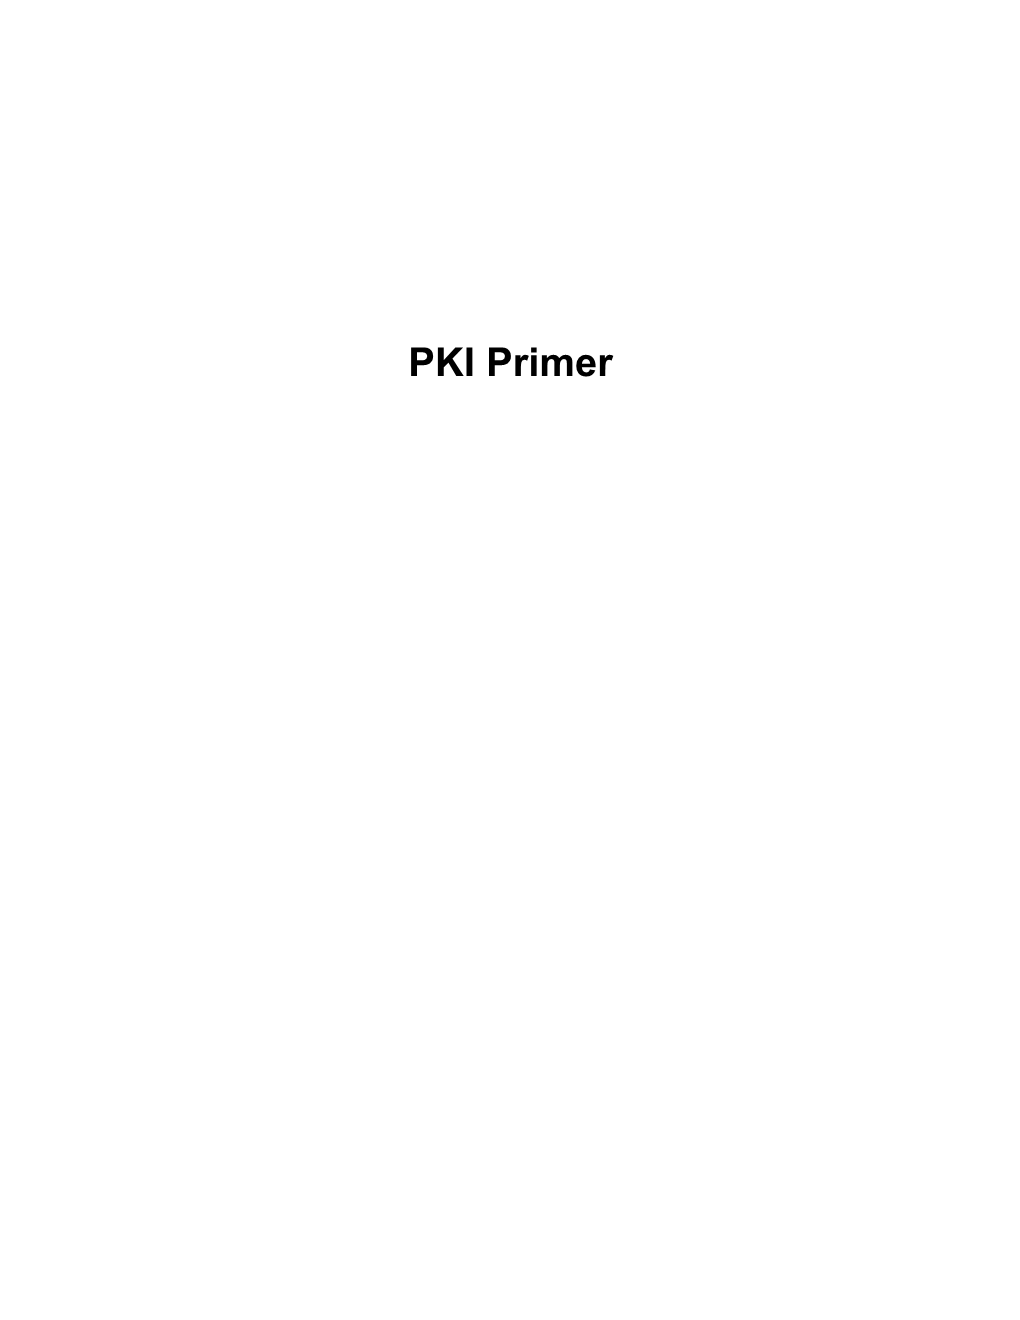 PKI Primer E-Government and Security Issues (By Permission from Itssimple.Biz)